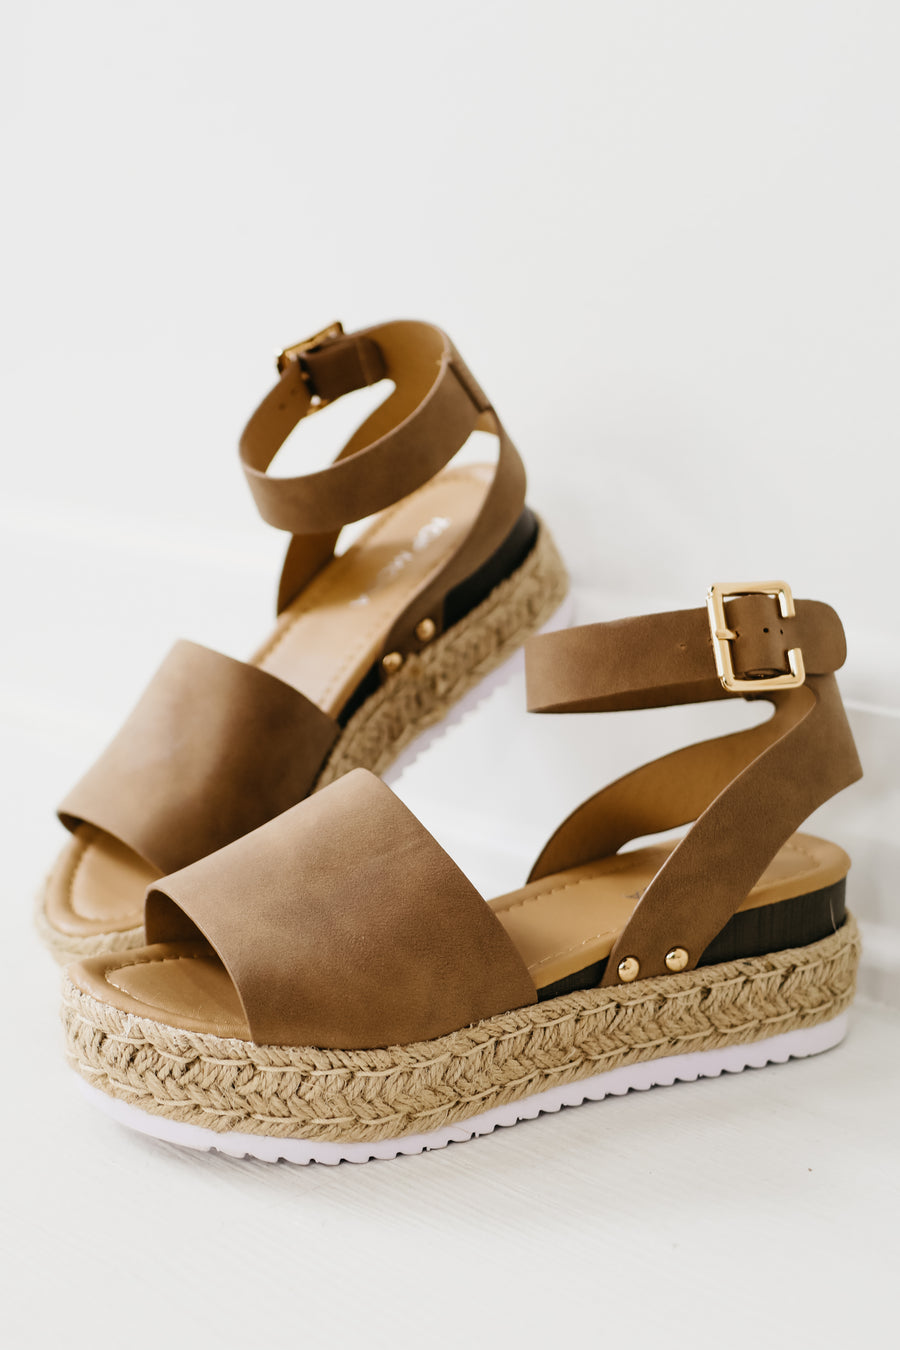 The Candide Espadrille Wedge Sandal  - FINAL SALE